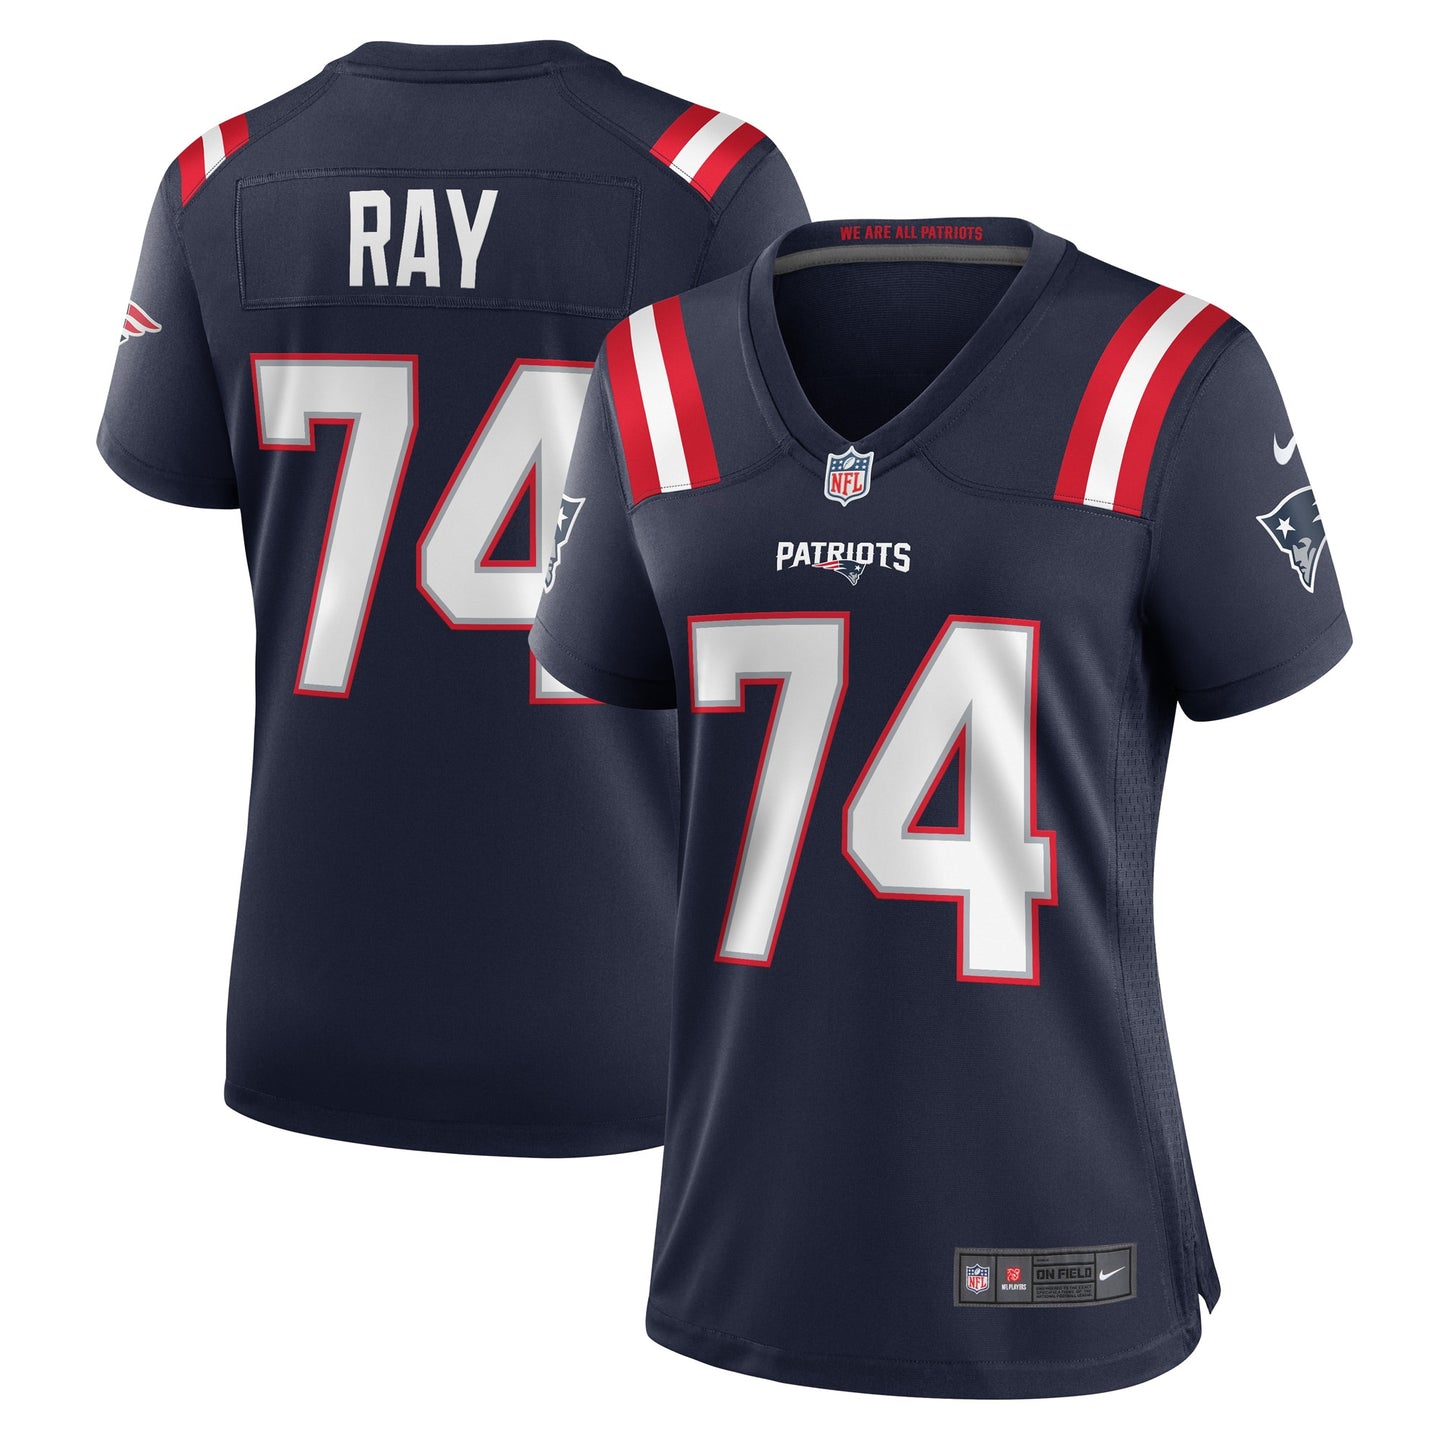 LaBryan Ray New England Patriots Nike Women's Game Player Jersey - Navy